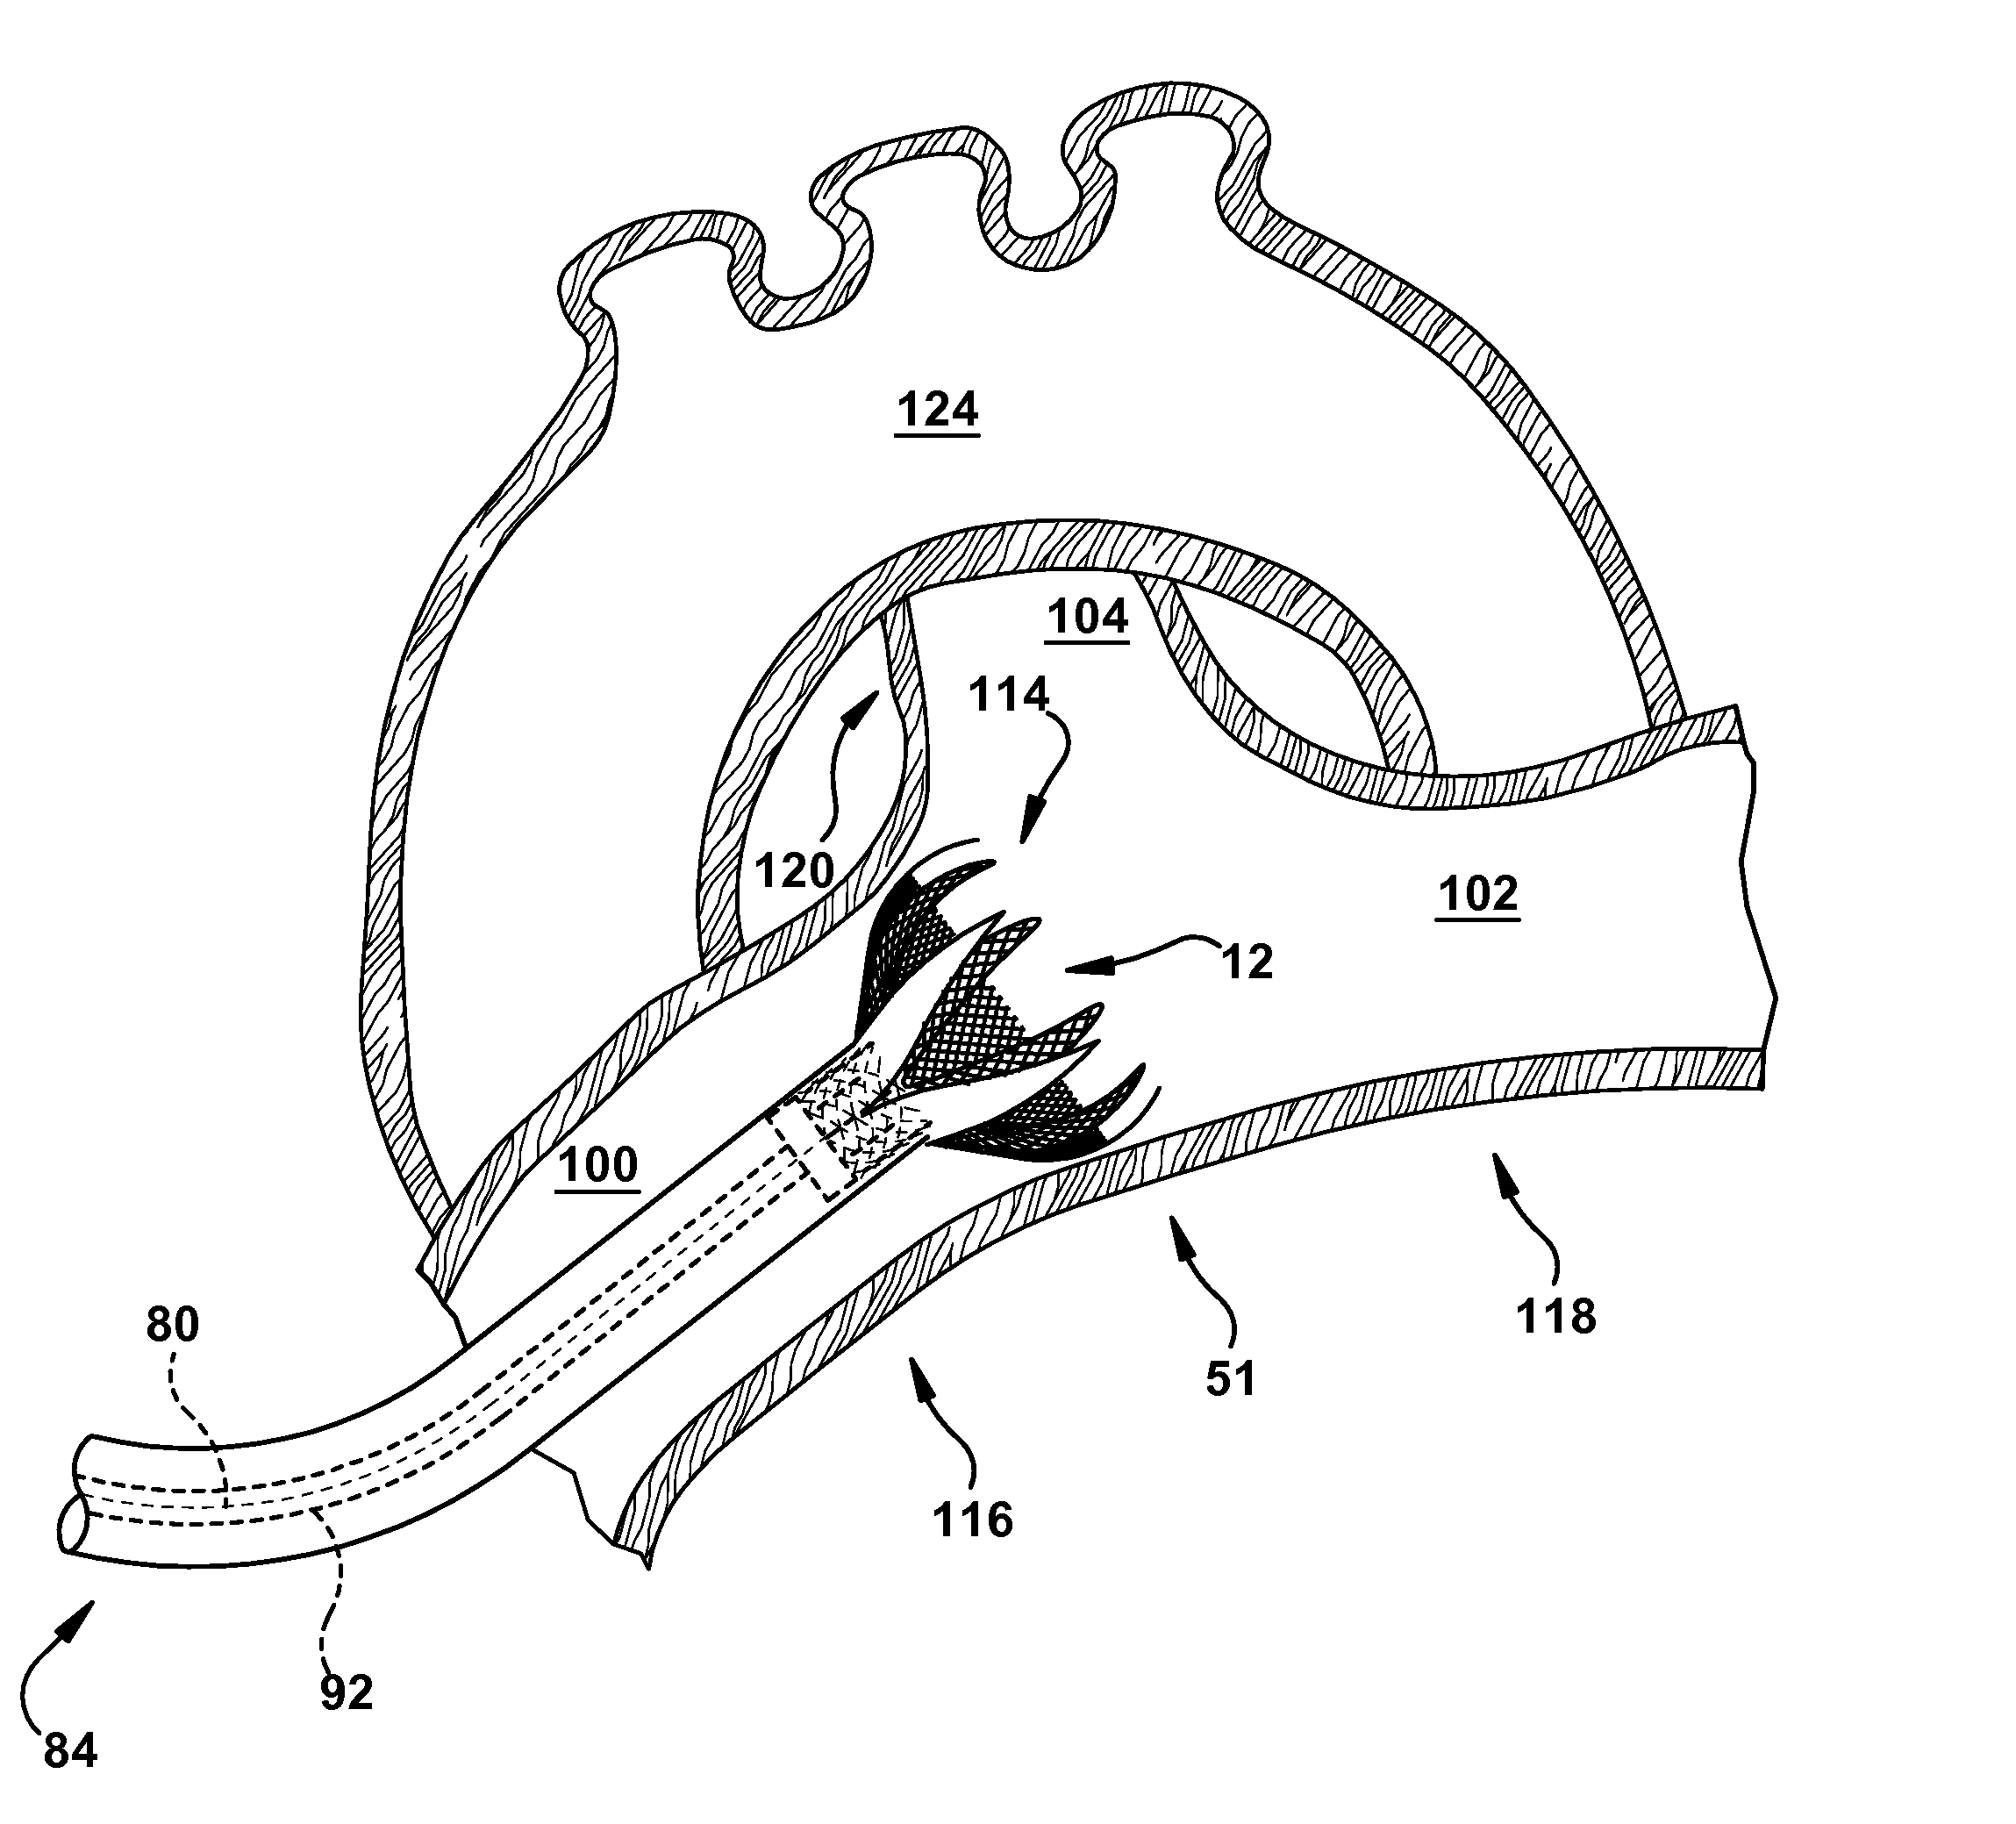 Apparatus and method for treating cardiovascular diseases